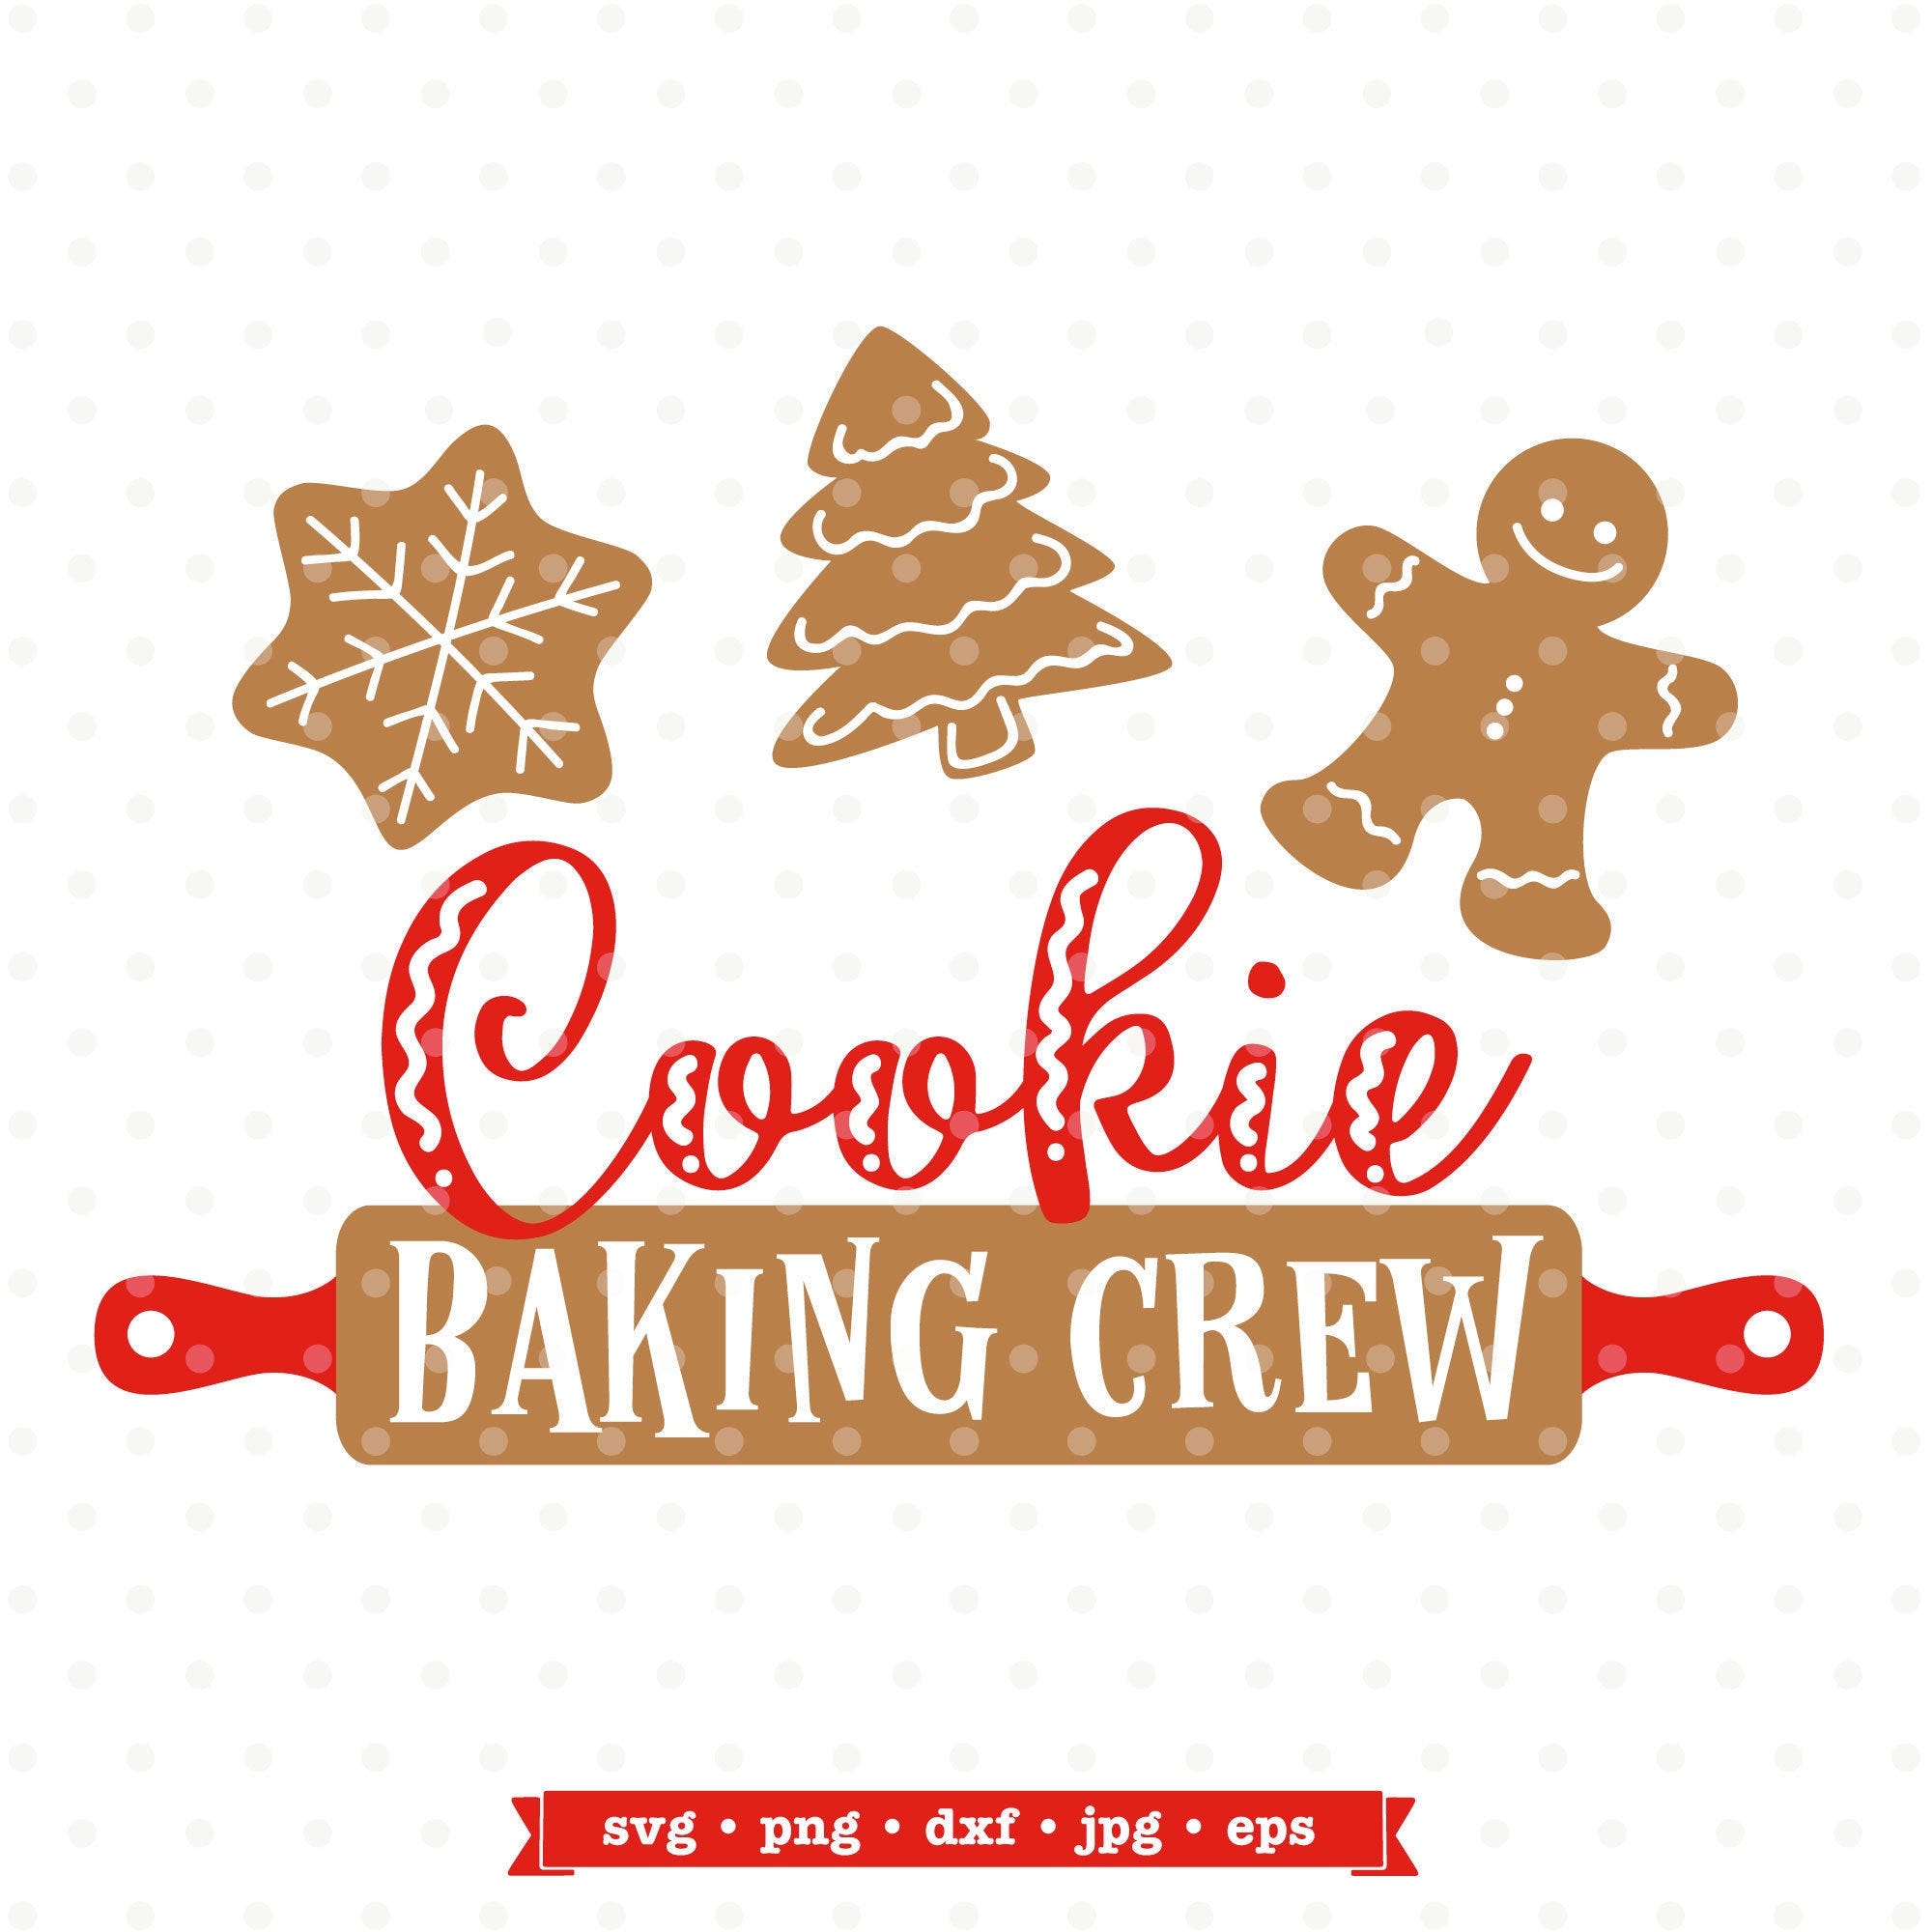 Christmas SVG file, Cookie Baking Crew SVG file, Christmas Apron SVG design, Christmas Cookie svg, Christmas baking crew, Christmas png